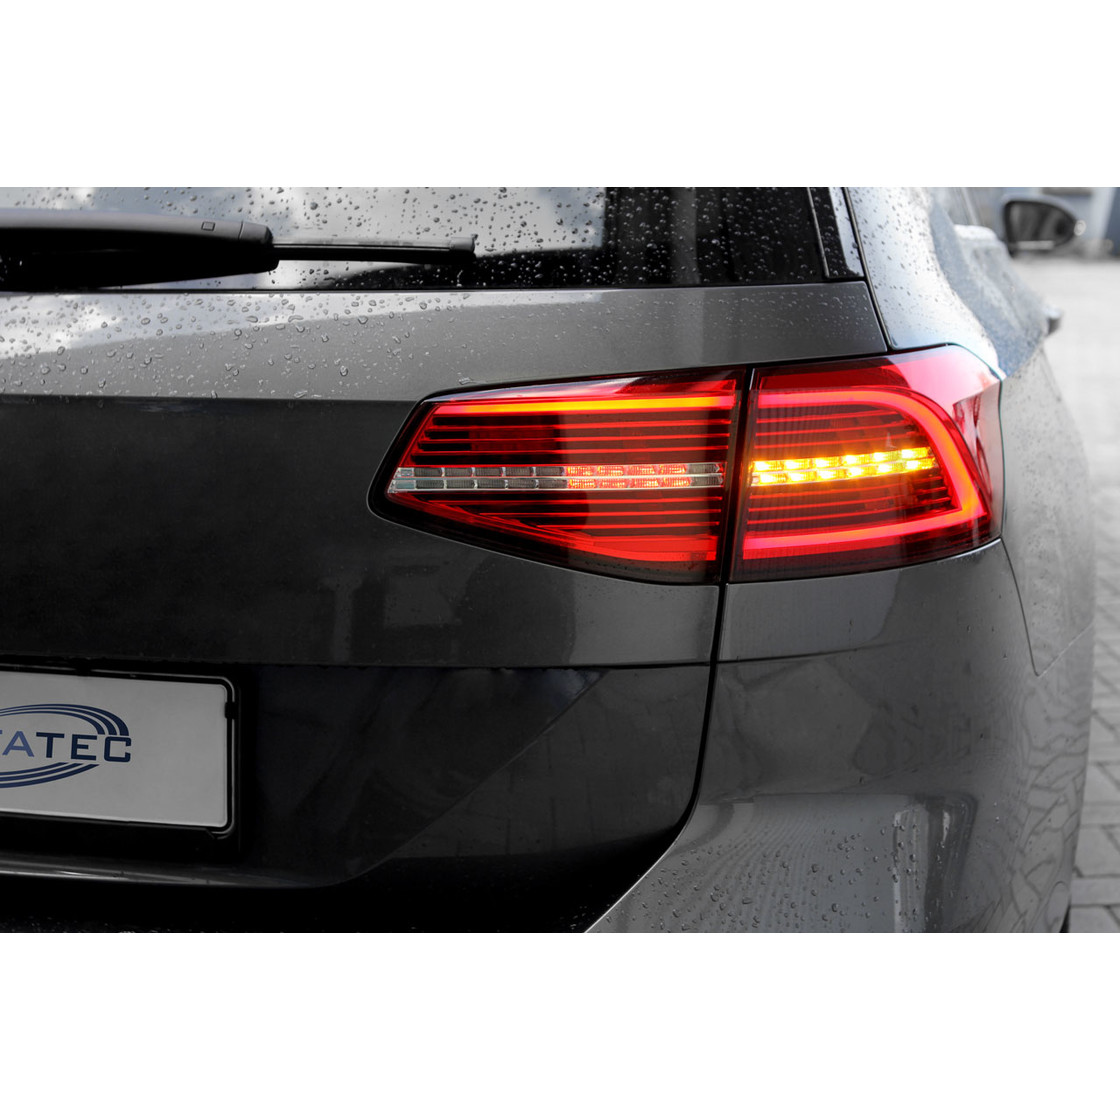 Cable set & Coding Dongle LED taillights for VW Sharan - 7N